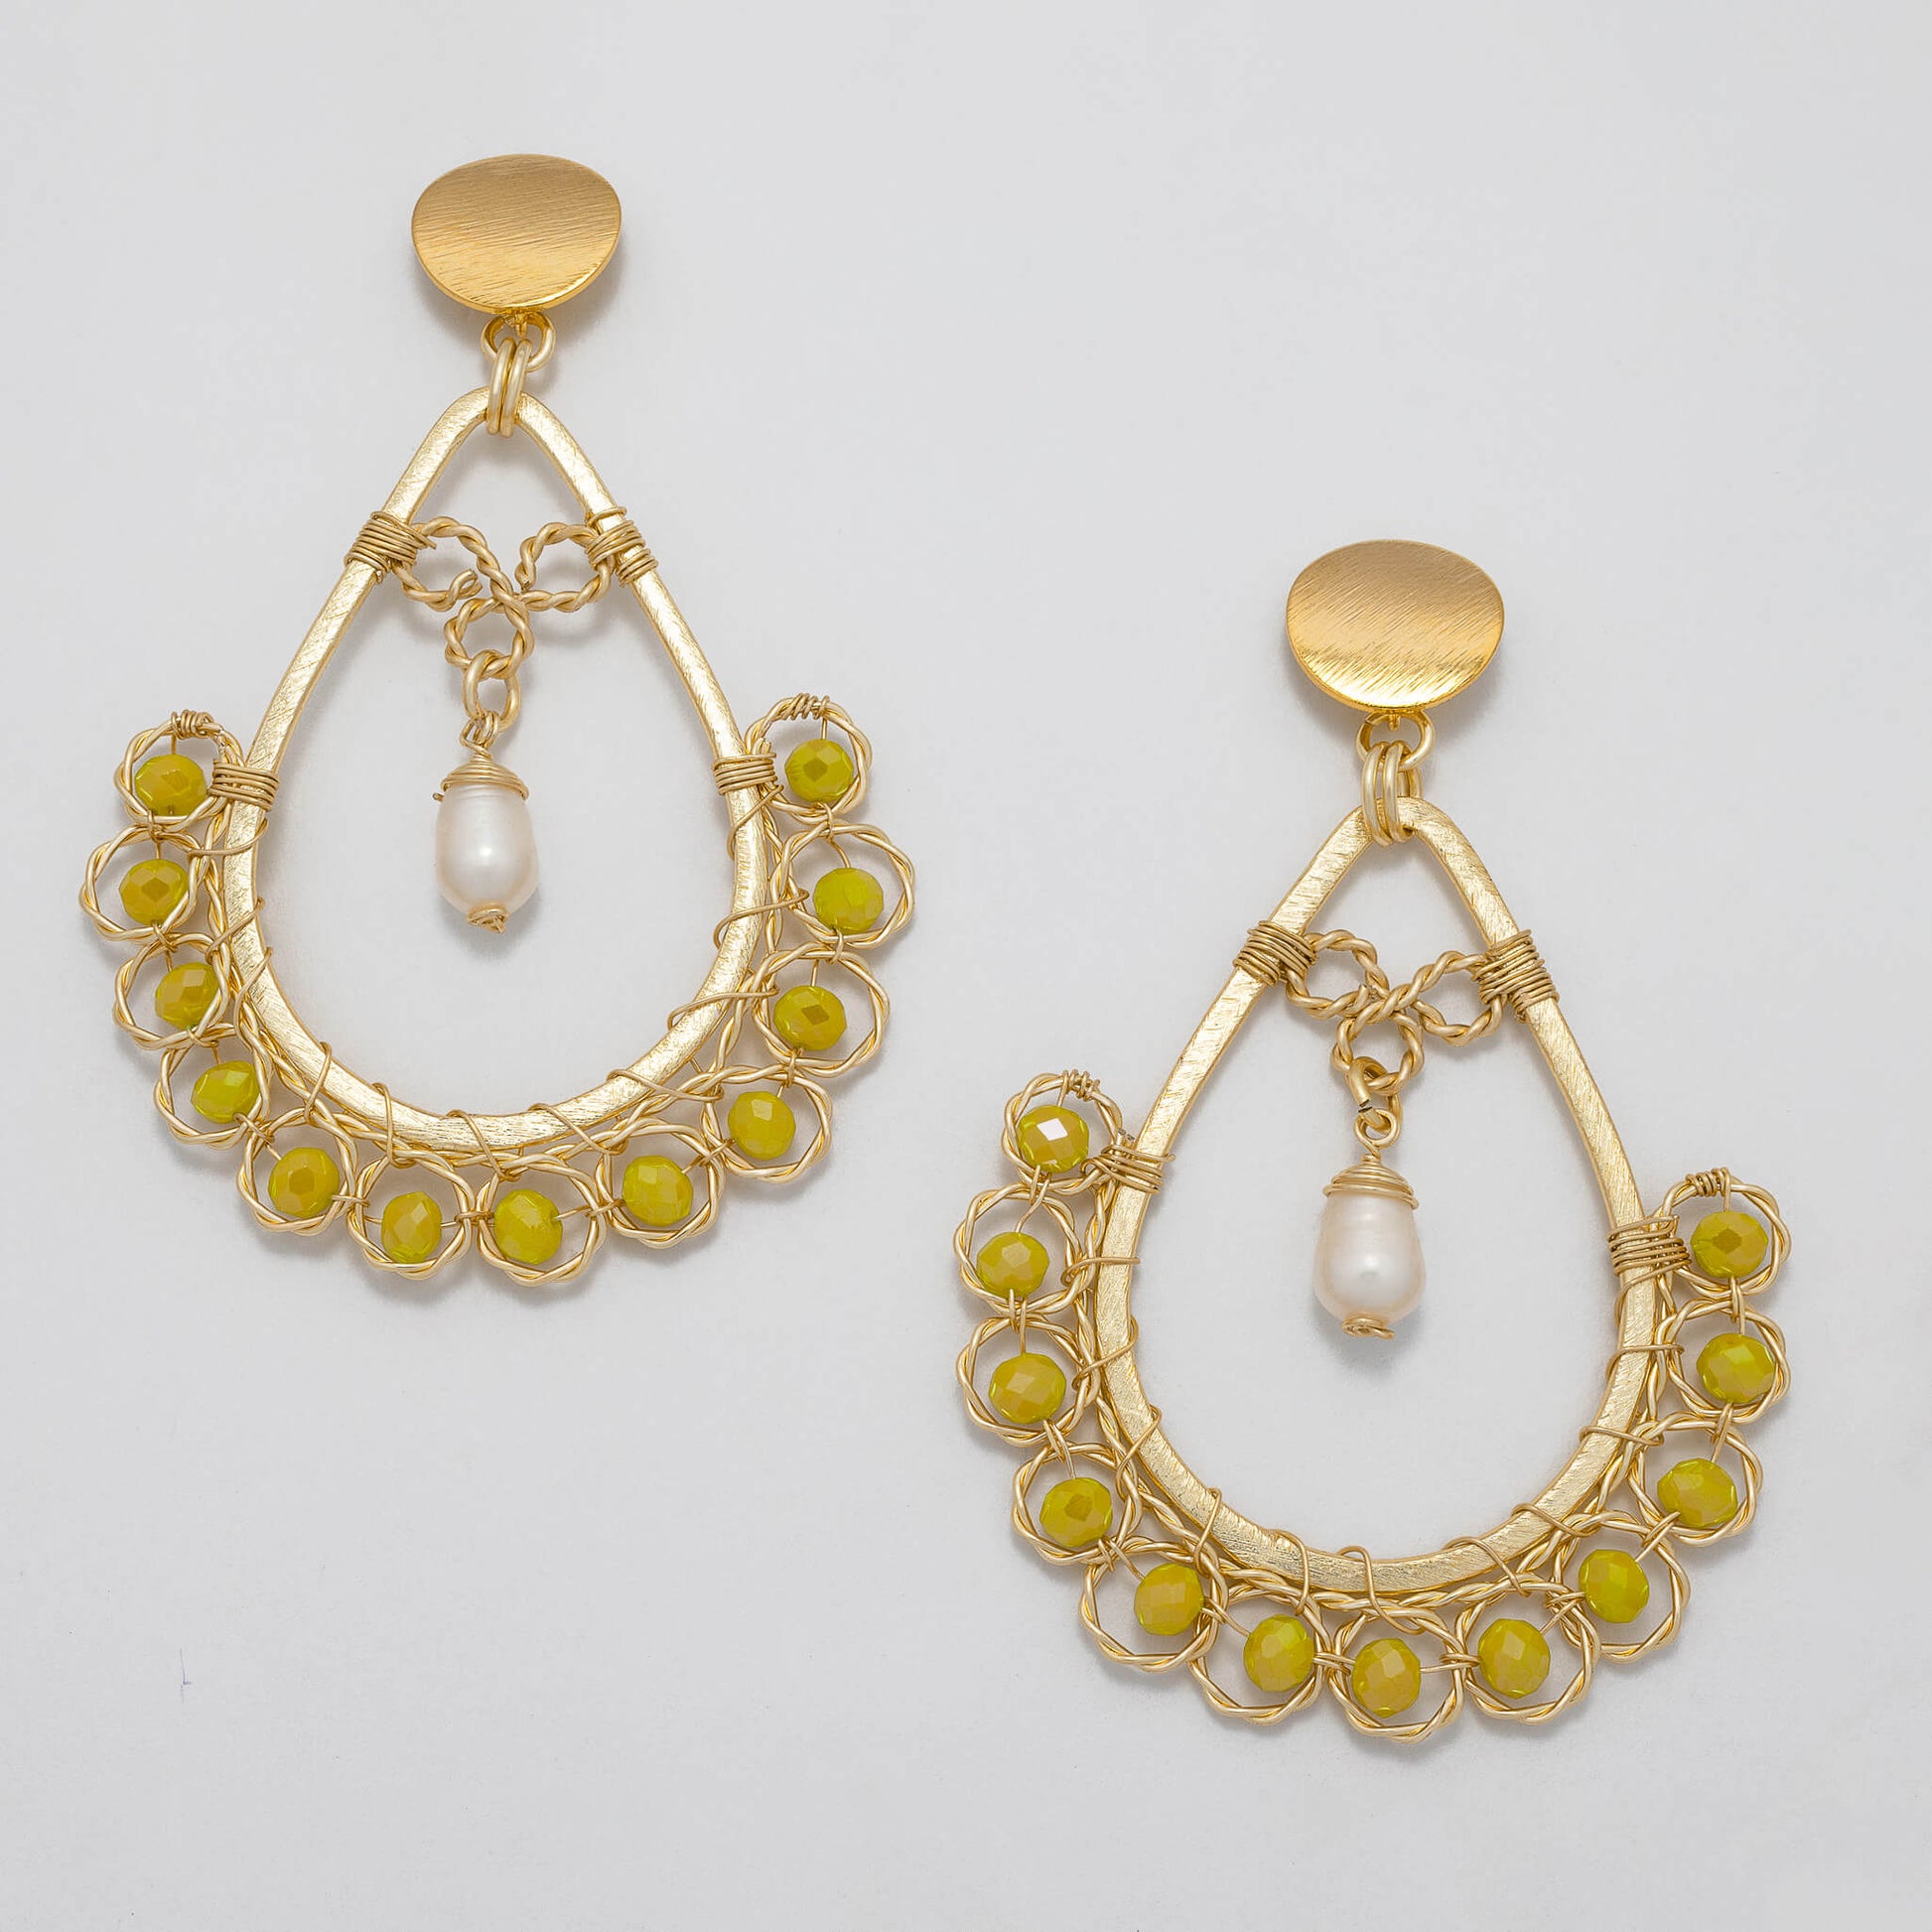 Amara I Earrings are 3 inches long. Gold teardrop Earrings. Gold, Yellow, and White earrings. Handmade with Faceted Crystal beads and freshwater pearls. Wire Wrapped Earrings.